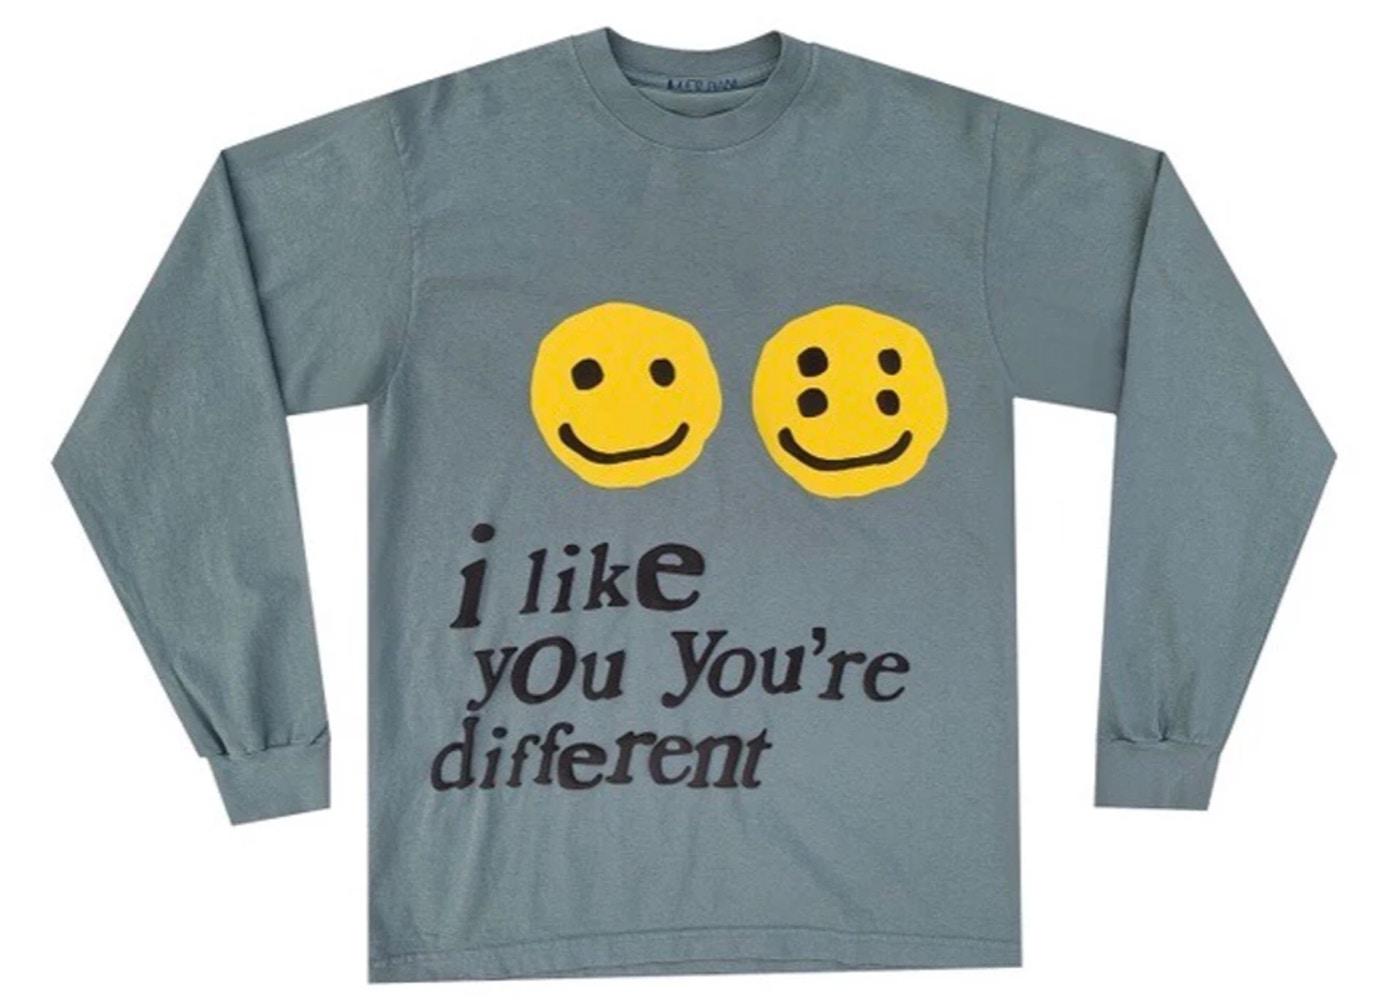 I Like You You're Different L/S Tee Grey by CACTUS PLANT FLEA MARKET